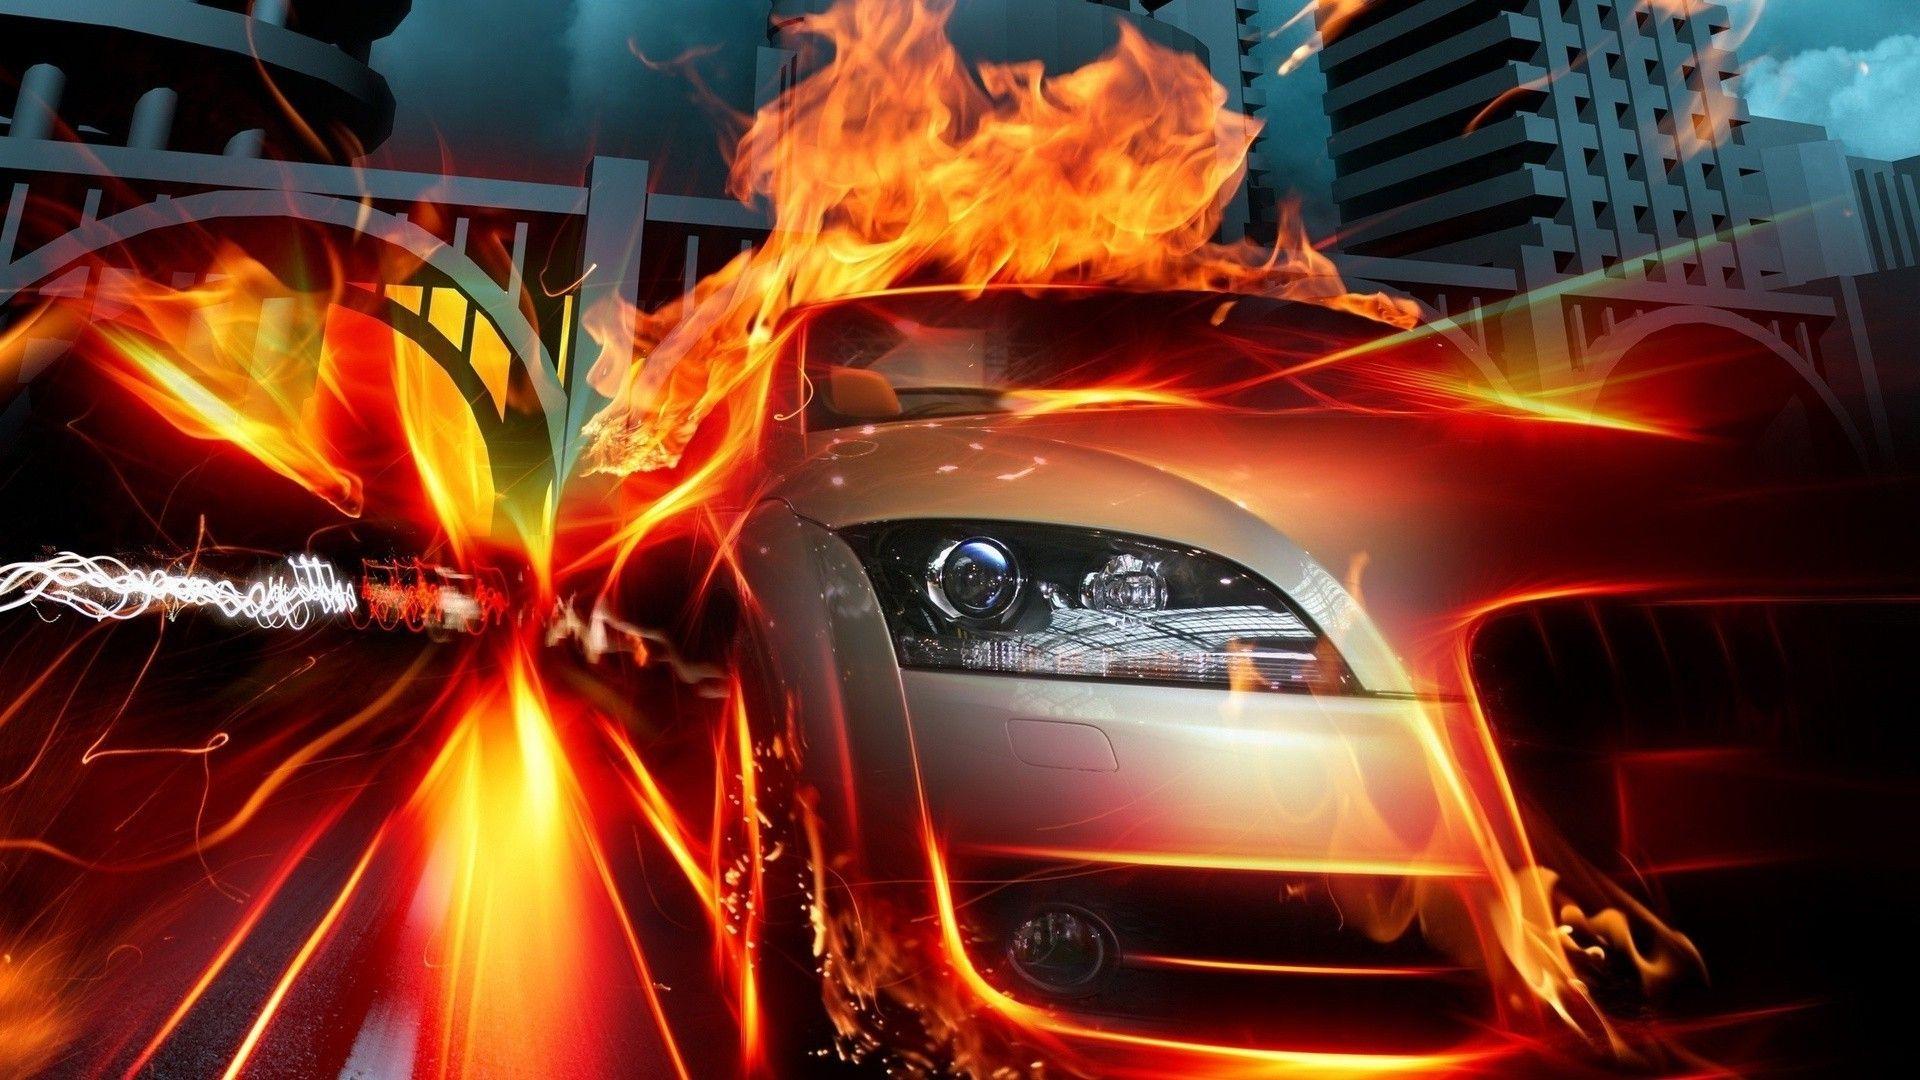 Car on fire. iPhone wallpaper for free